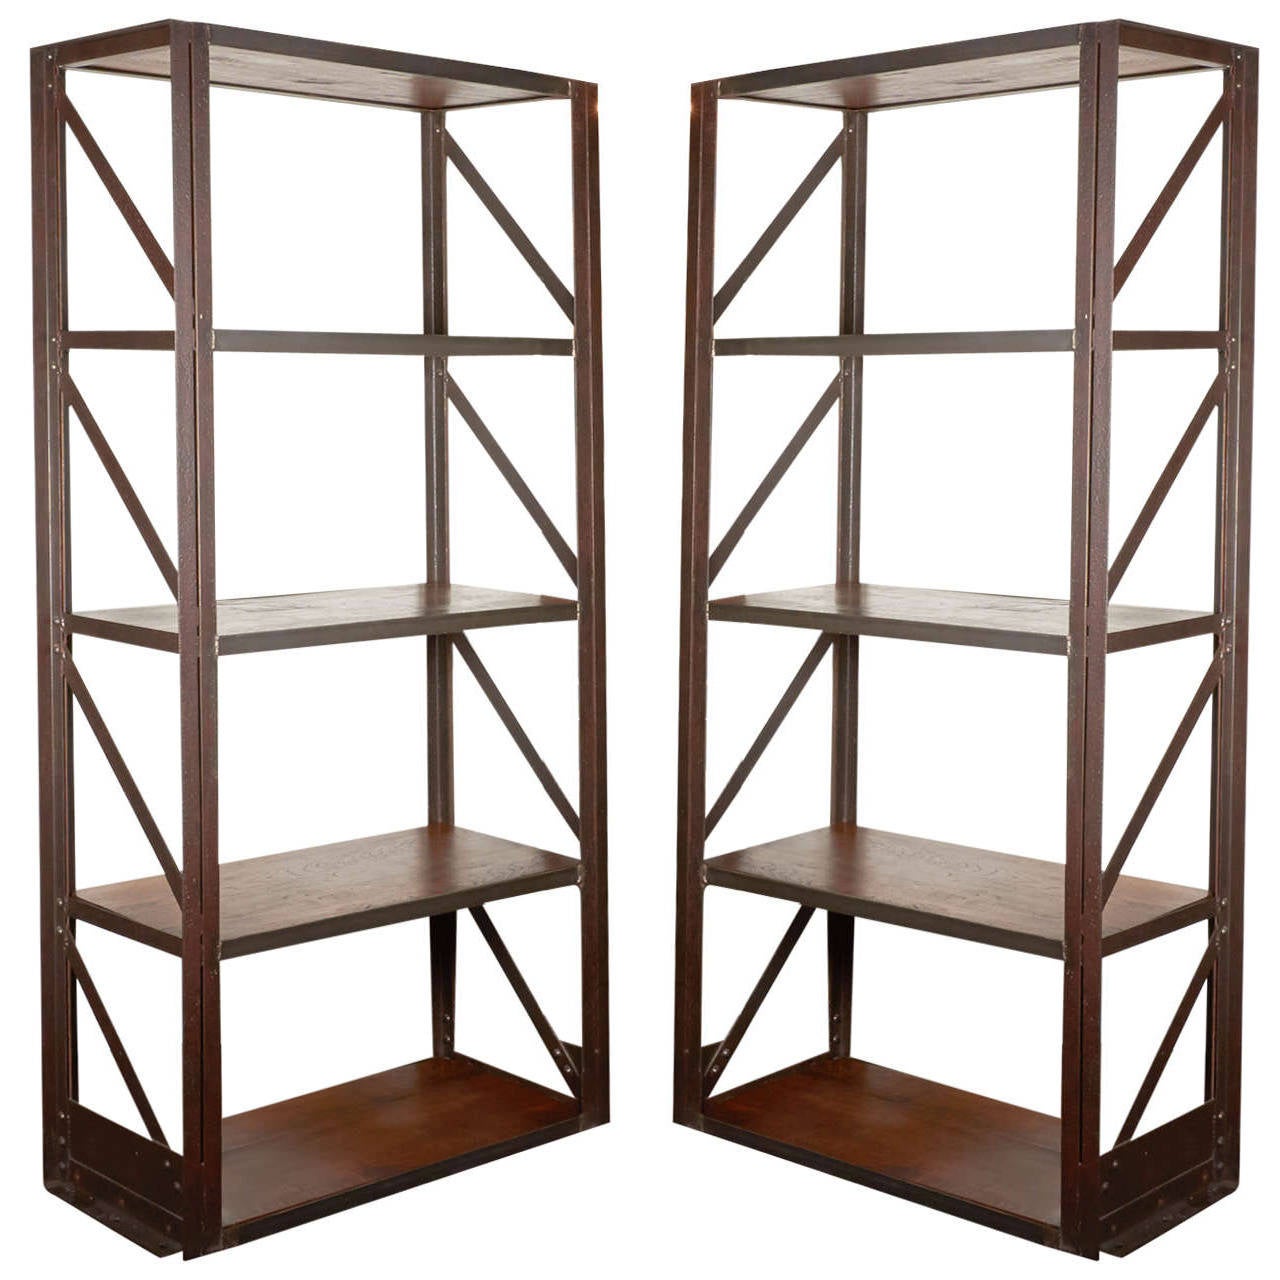 French Industrial Bookcases or Etageres with Steel Frames and Reclaimed Wood